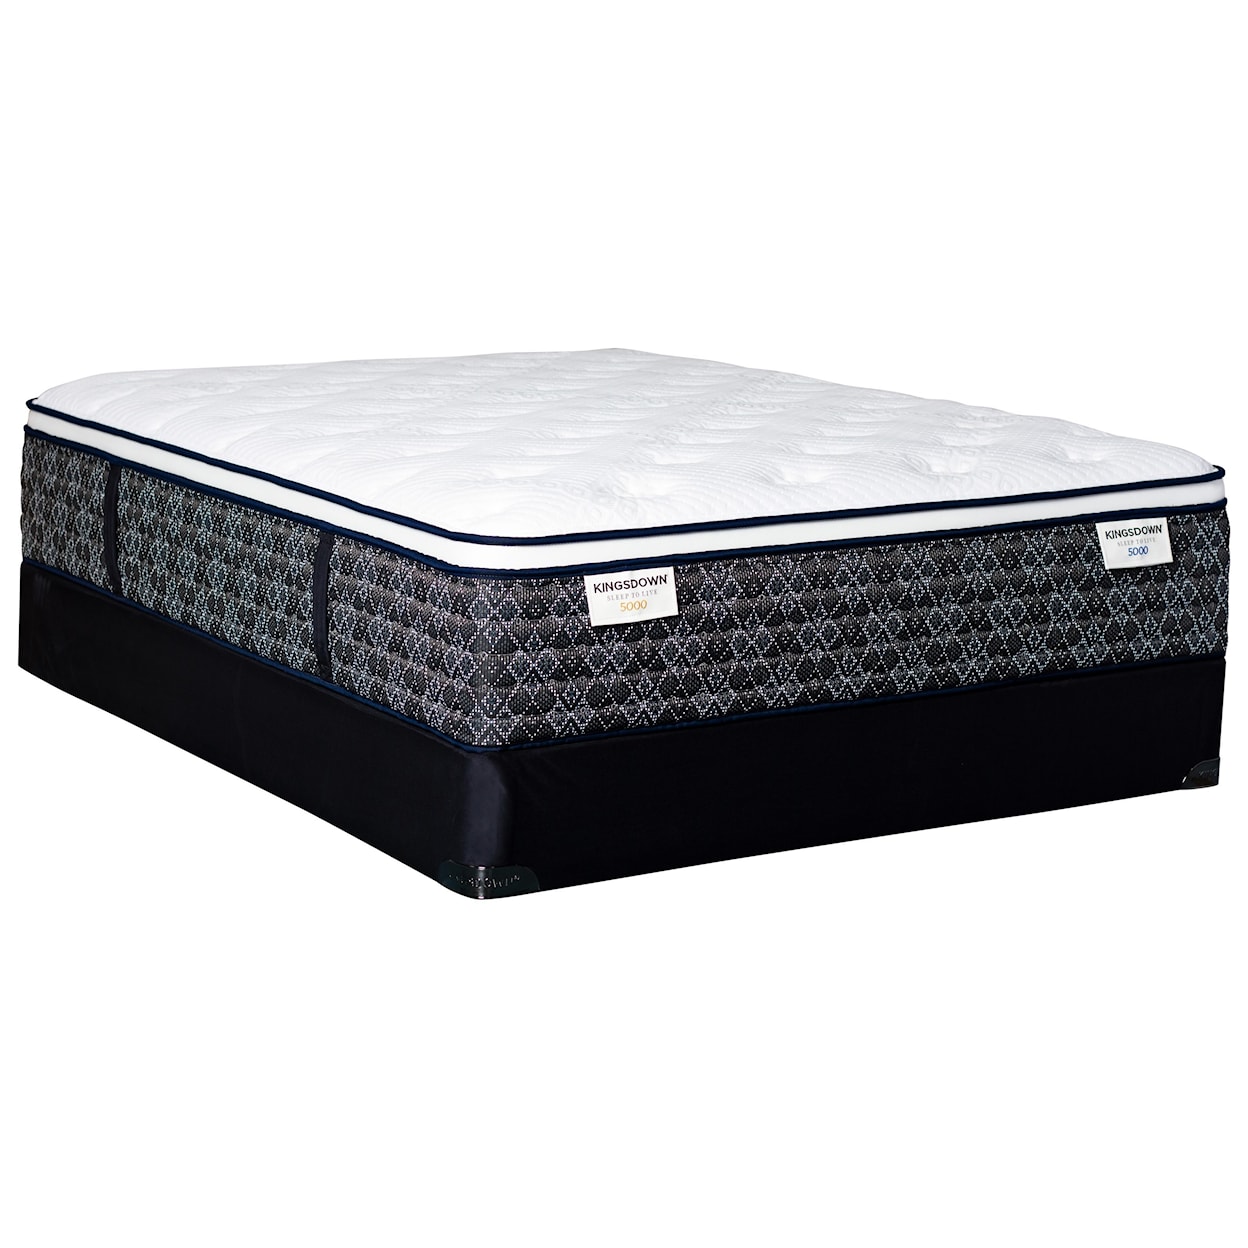 Kingsdown Sleep to Live 5000 Gold Blue ET Twin Pocketed Coil Mattress Set